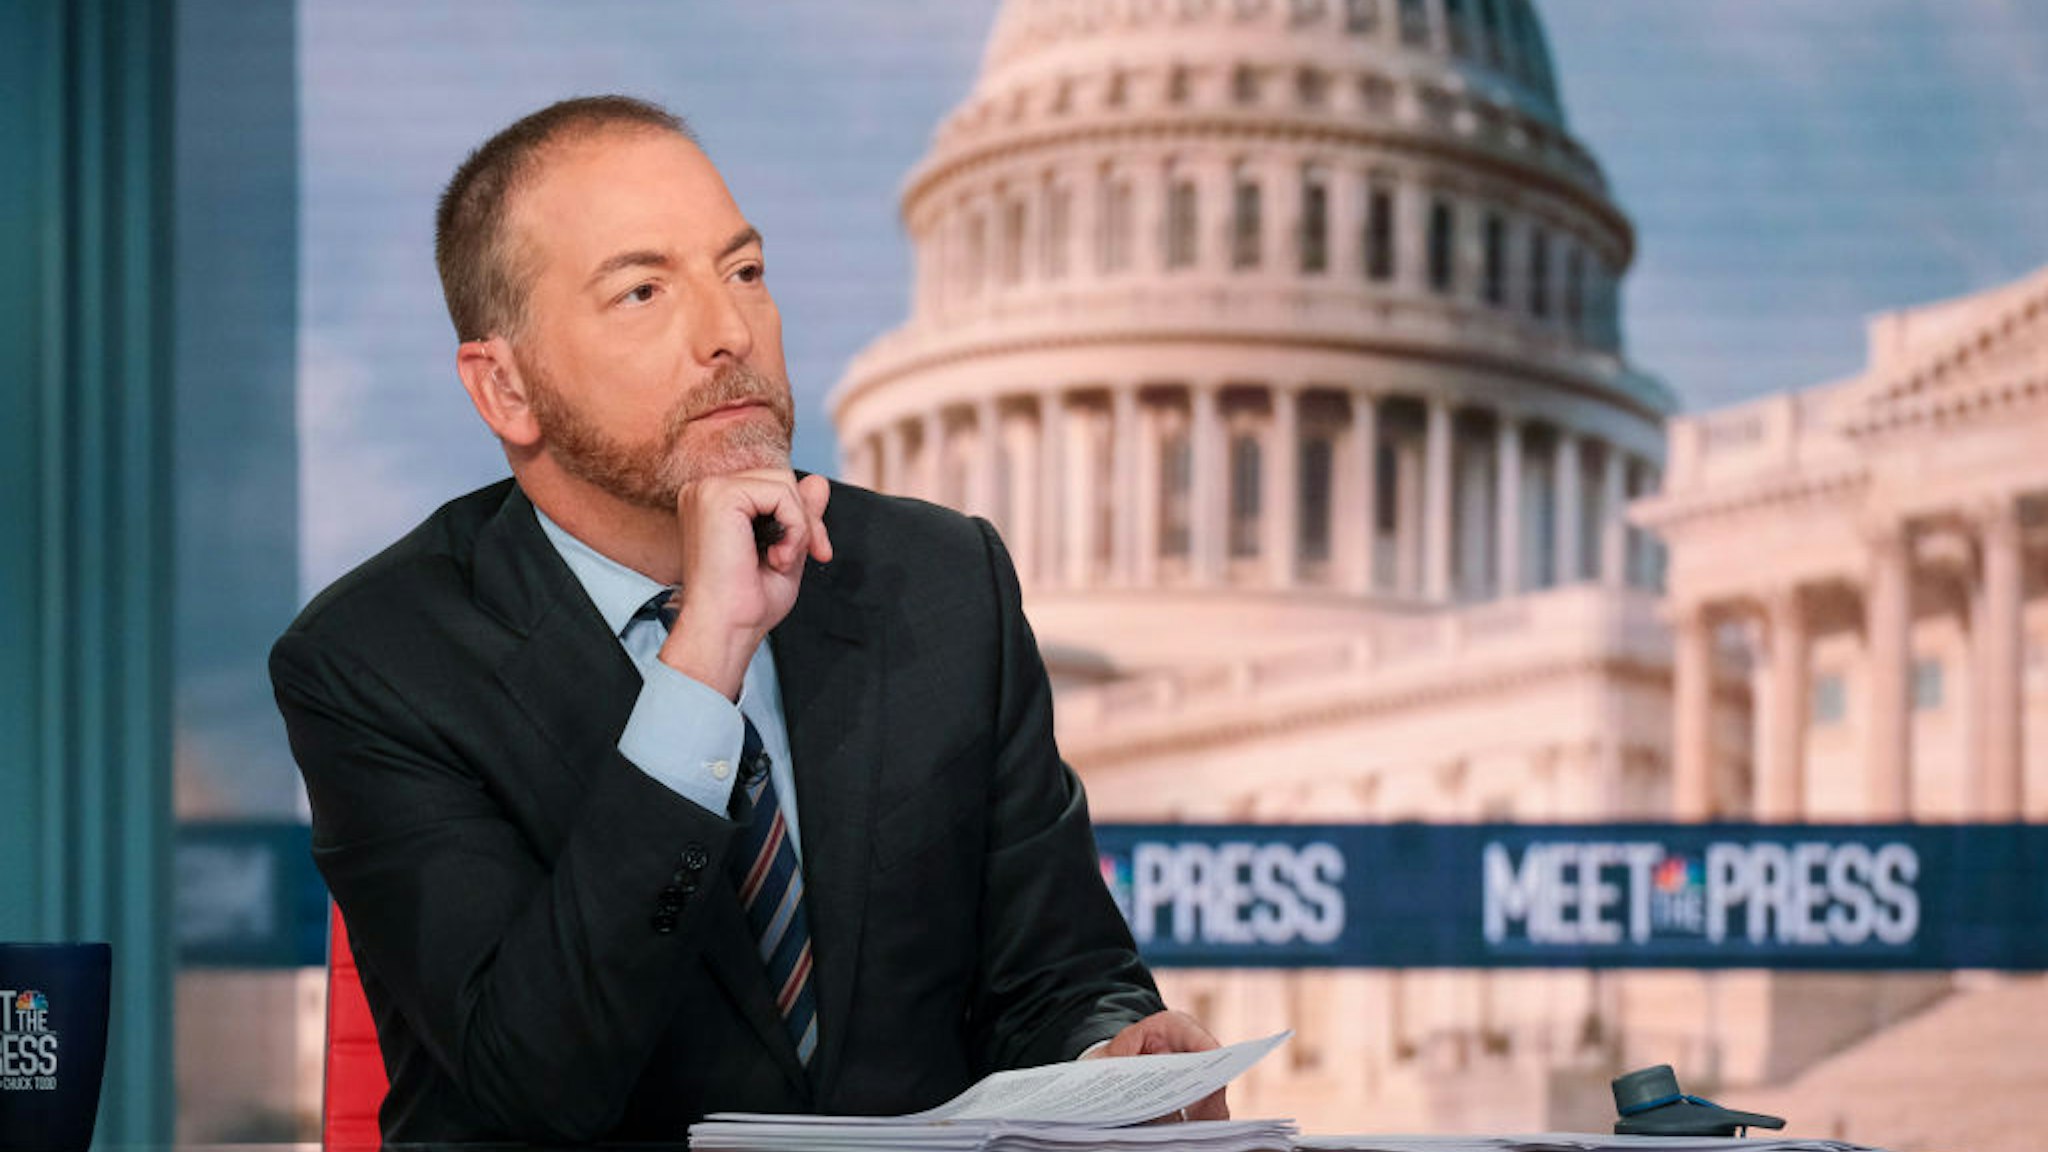 MEET THE PRESS -- Pictured: Moderator Chuck Todd appears on Meet the Press in Washington, D.C. Sunday, Aug. 7, 2022. -- (Photo by: William B. Plowman/NBC via Getty Images)